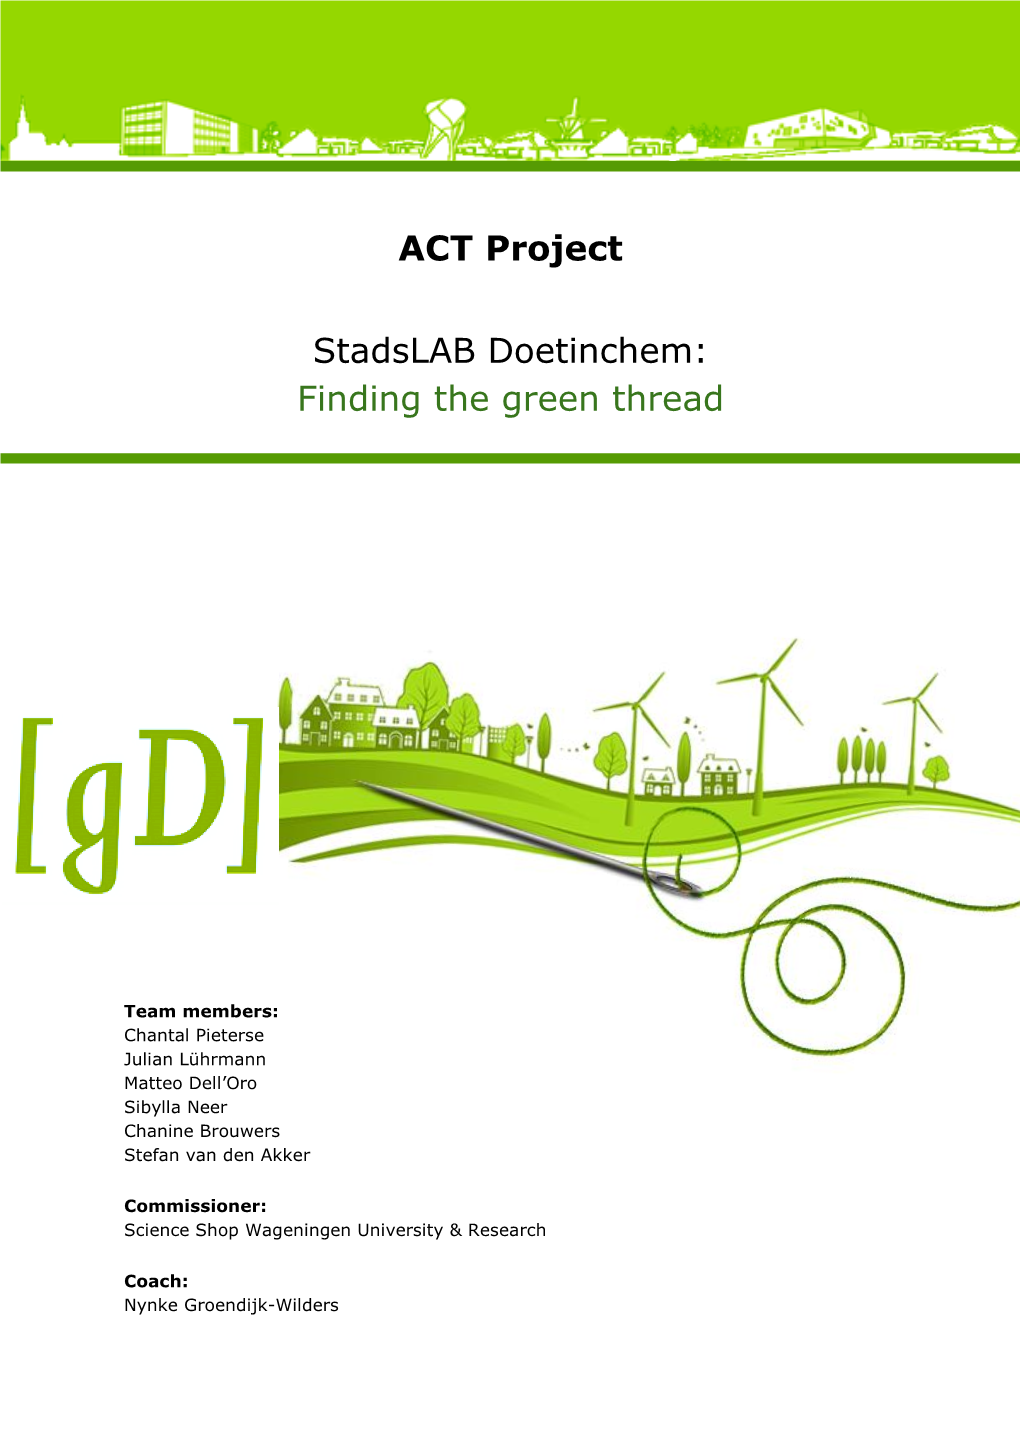 ACT Project Stadslab Doetinchem: Finding the Green Thread